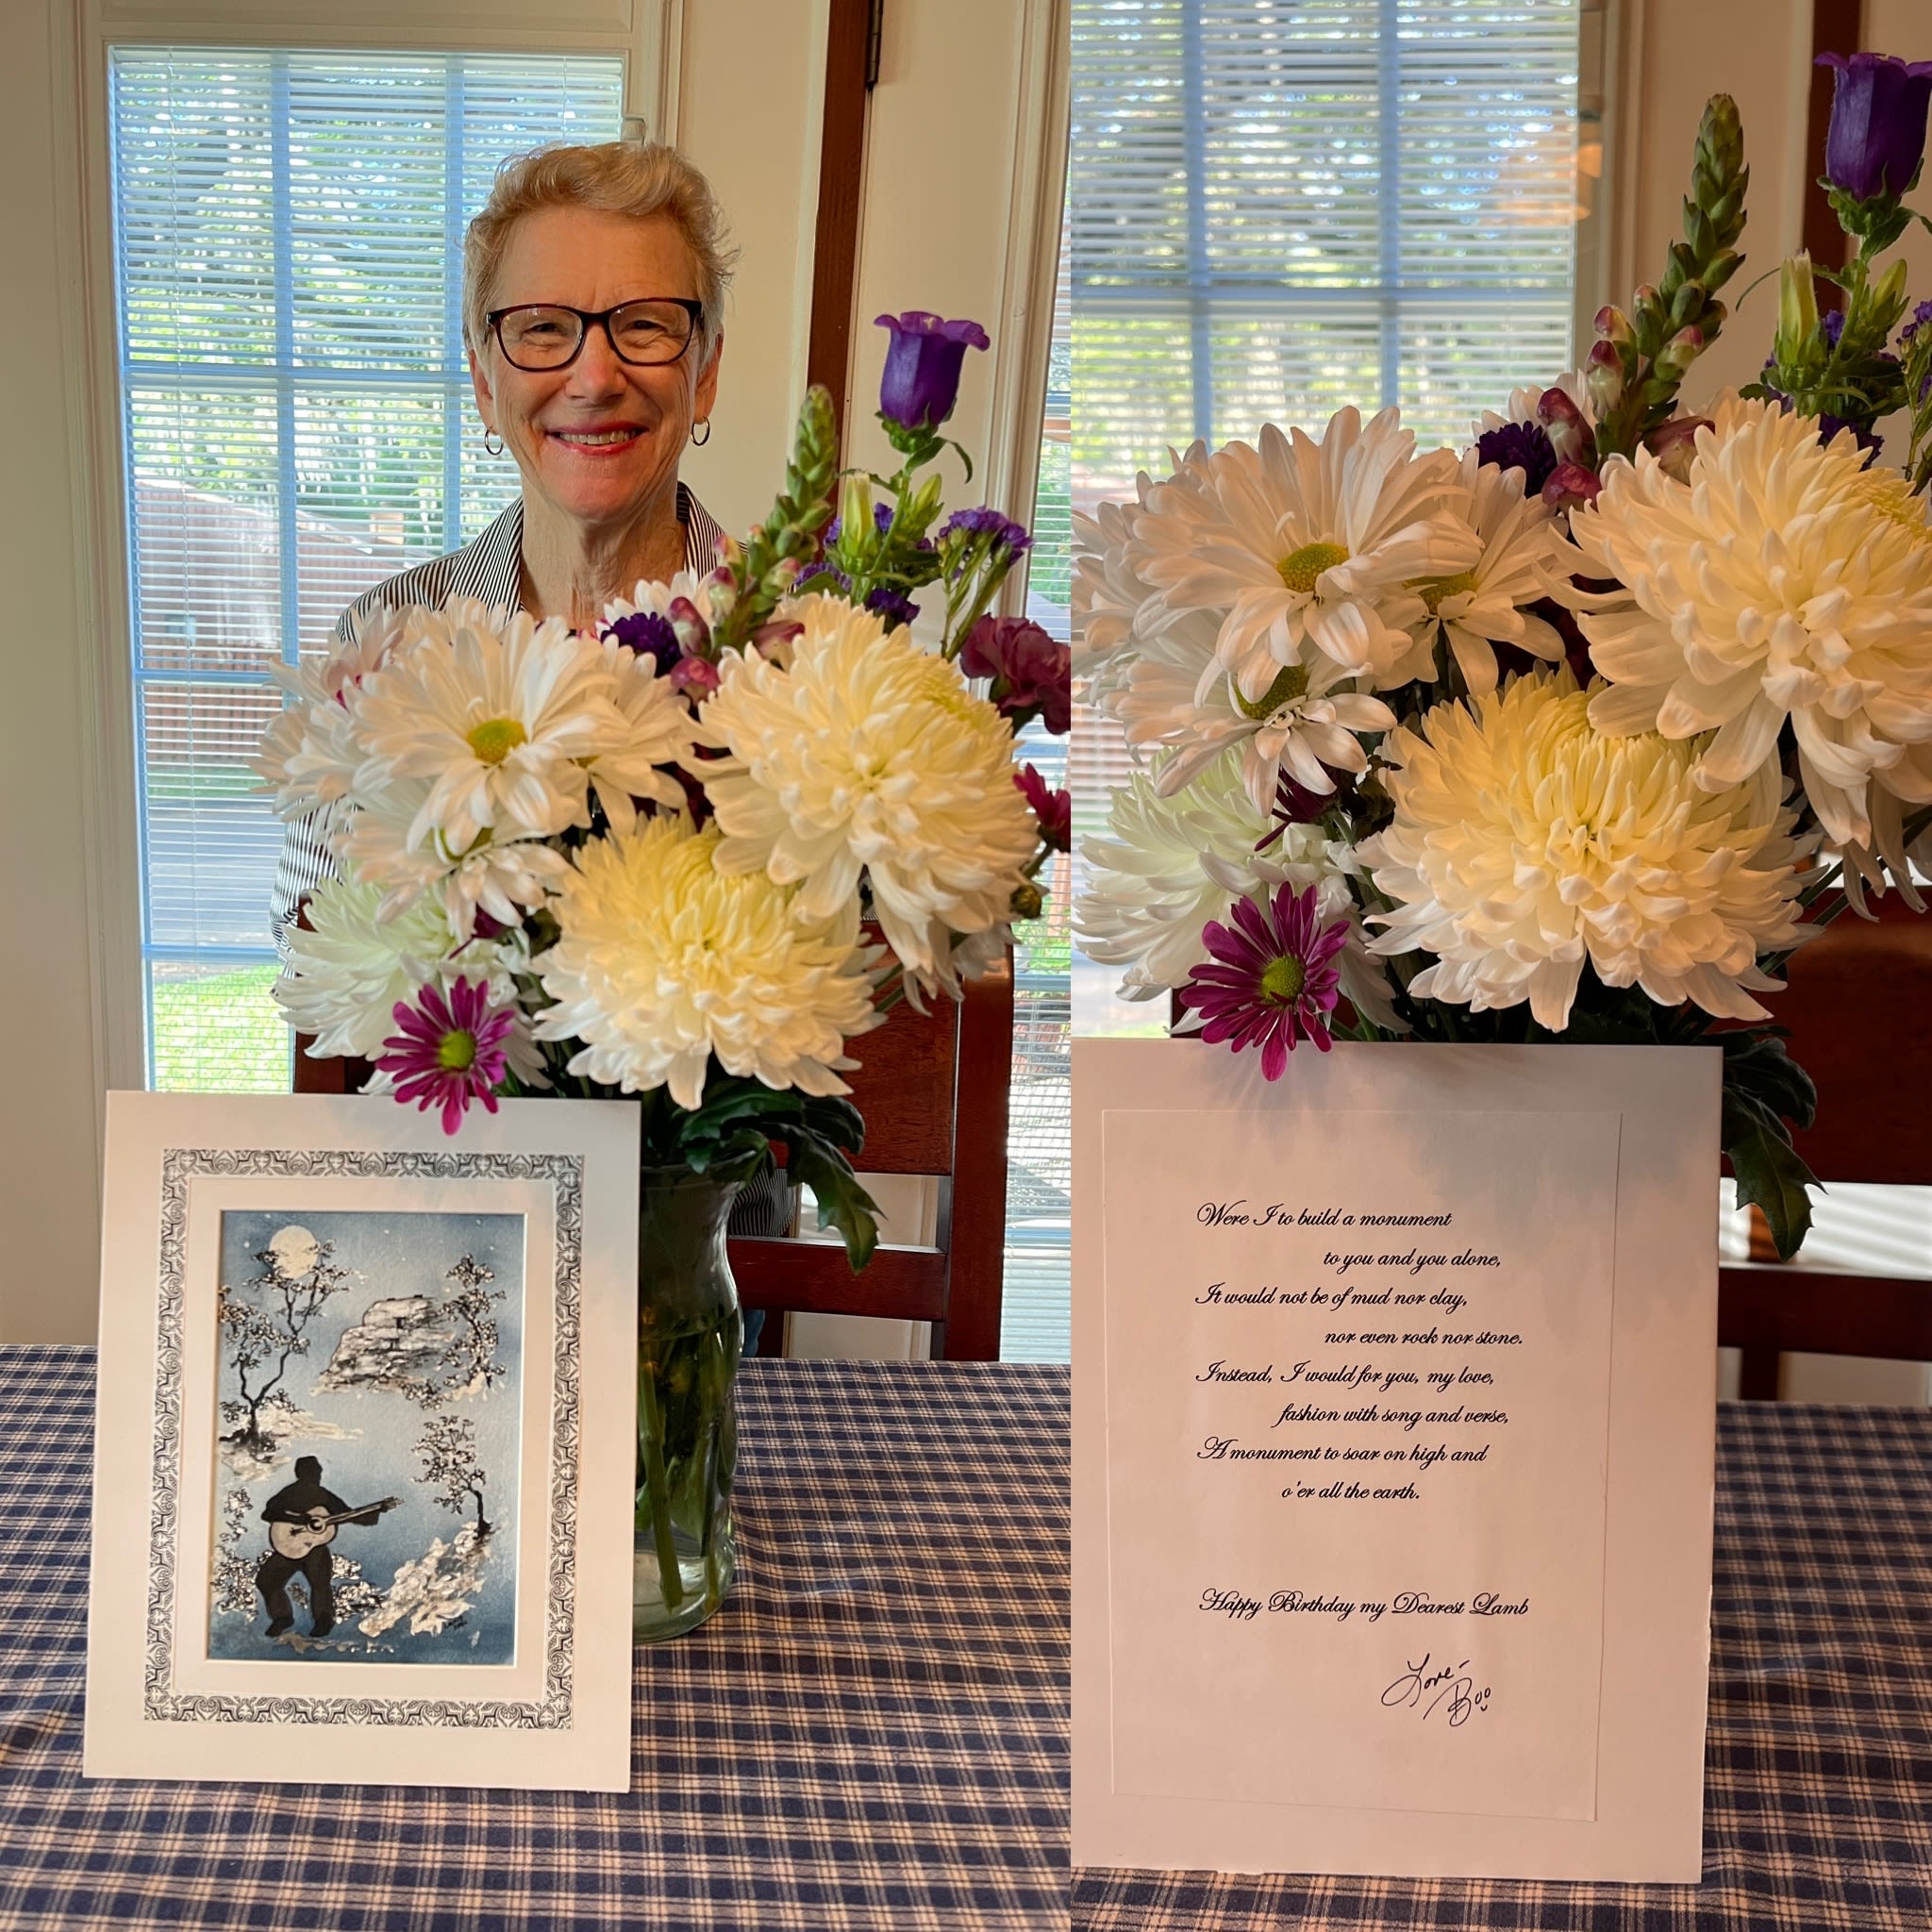 M.A. Hastings, who has short curly strawberry blonde hair, blue eyes and dark framed glasses, is standing behind a large bouquet of white and purple flowers in a glass vase. The flower vase   is on a navy and cream colored table cloth. In front of the flowers is a beautiful card M.A.’s husband,Lance Hastings painted as one of her birthday gifts.  The painting is framed in white matting with a leaf and heart border design dark black ink.  In the left foreground of the watercolor is a silhouette of a man strumming an acoustic guitar. The rest of the painting is in a Chinese style, with wisps of sparsely branched trees and delicate leaves in whites and grey.  The full white moon peaks out between two branches of the tree in the bluish grey background sky. The second image in the photo is the poem Lance wrote out in a cursive script on the back of the painting.  It reads:  Were I to build a monument to you and you alone, it would not be of mud or clay nor even rock nor stone. Instead, I would for you, my love, fashion with song and verse, a monument to sore on high and o’er all the Earth. Happy birthday, my dearest!